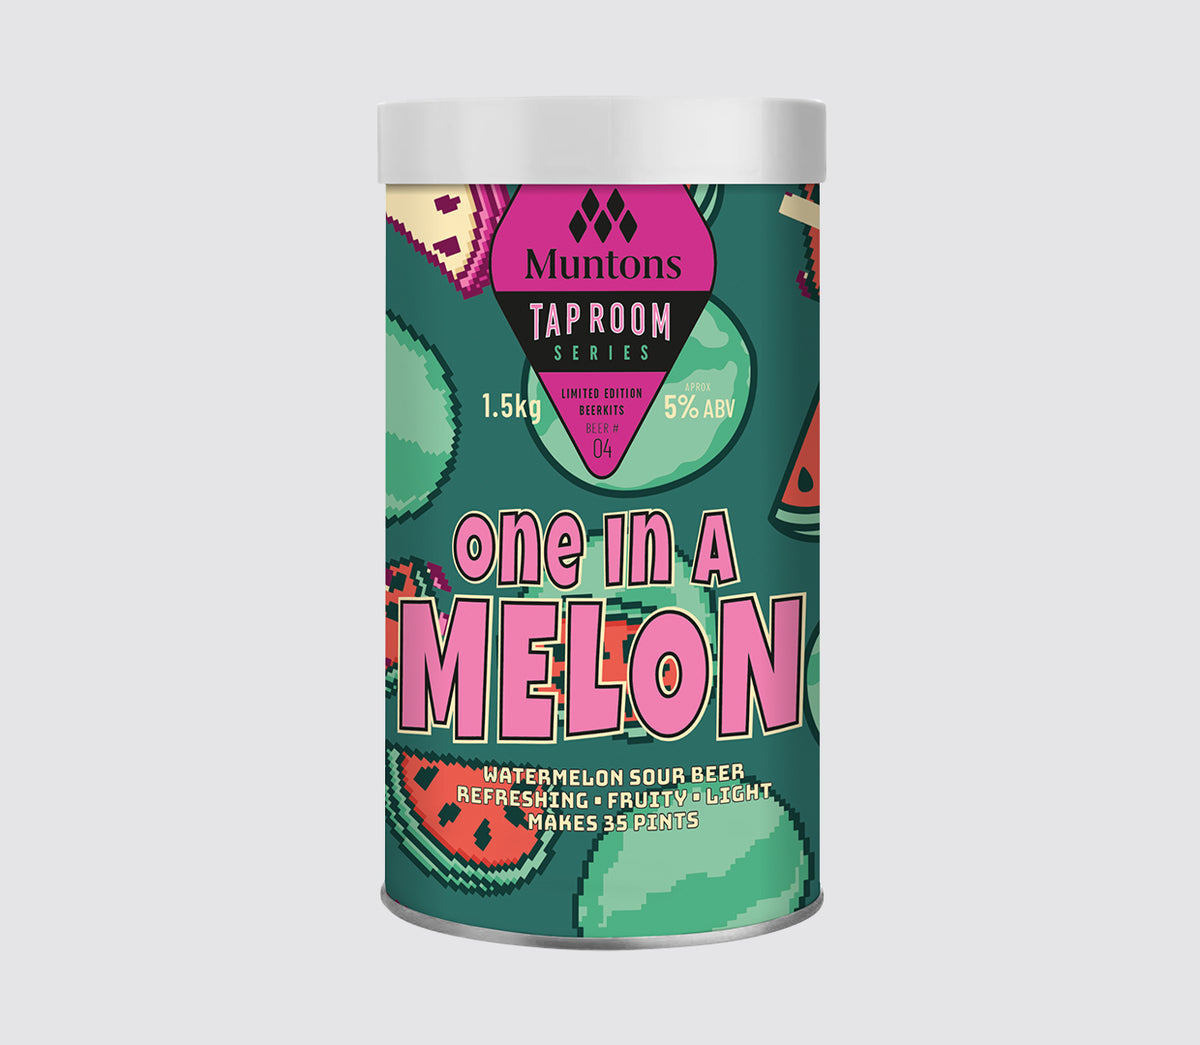 Muntons Taproom Series One In A Melon 1.5kg - All Things Fermented | Home Brew Shop NZ | Supplies | Equipment